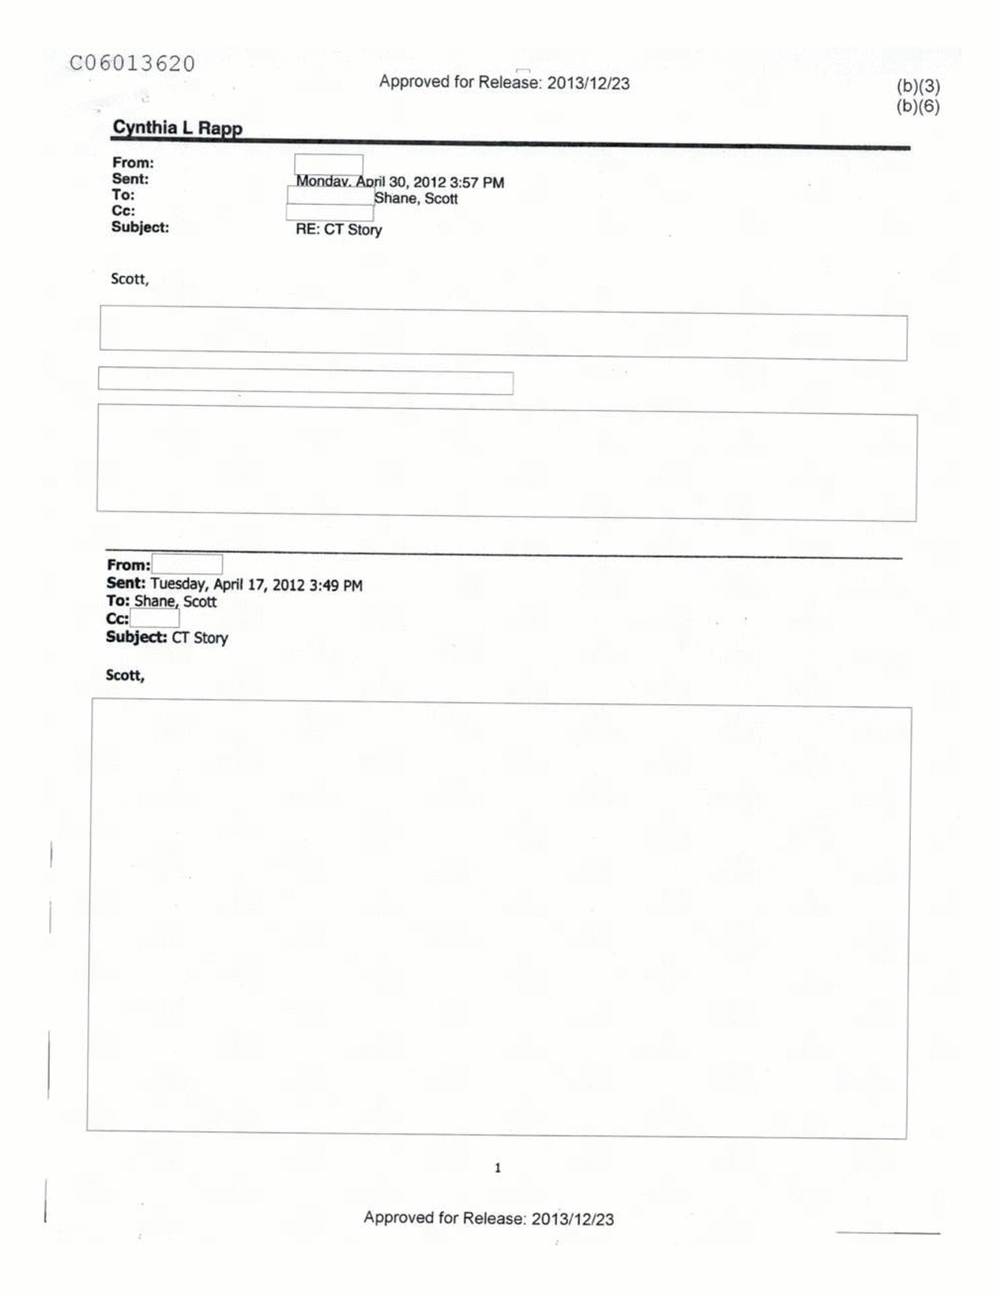 Page 453 from Email Correspondence Between Reporters and CIA Flacks